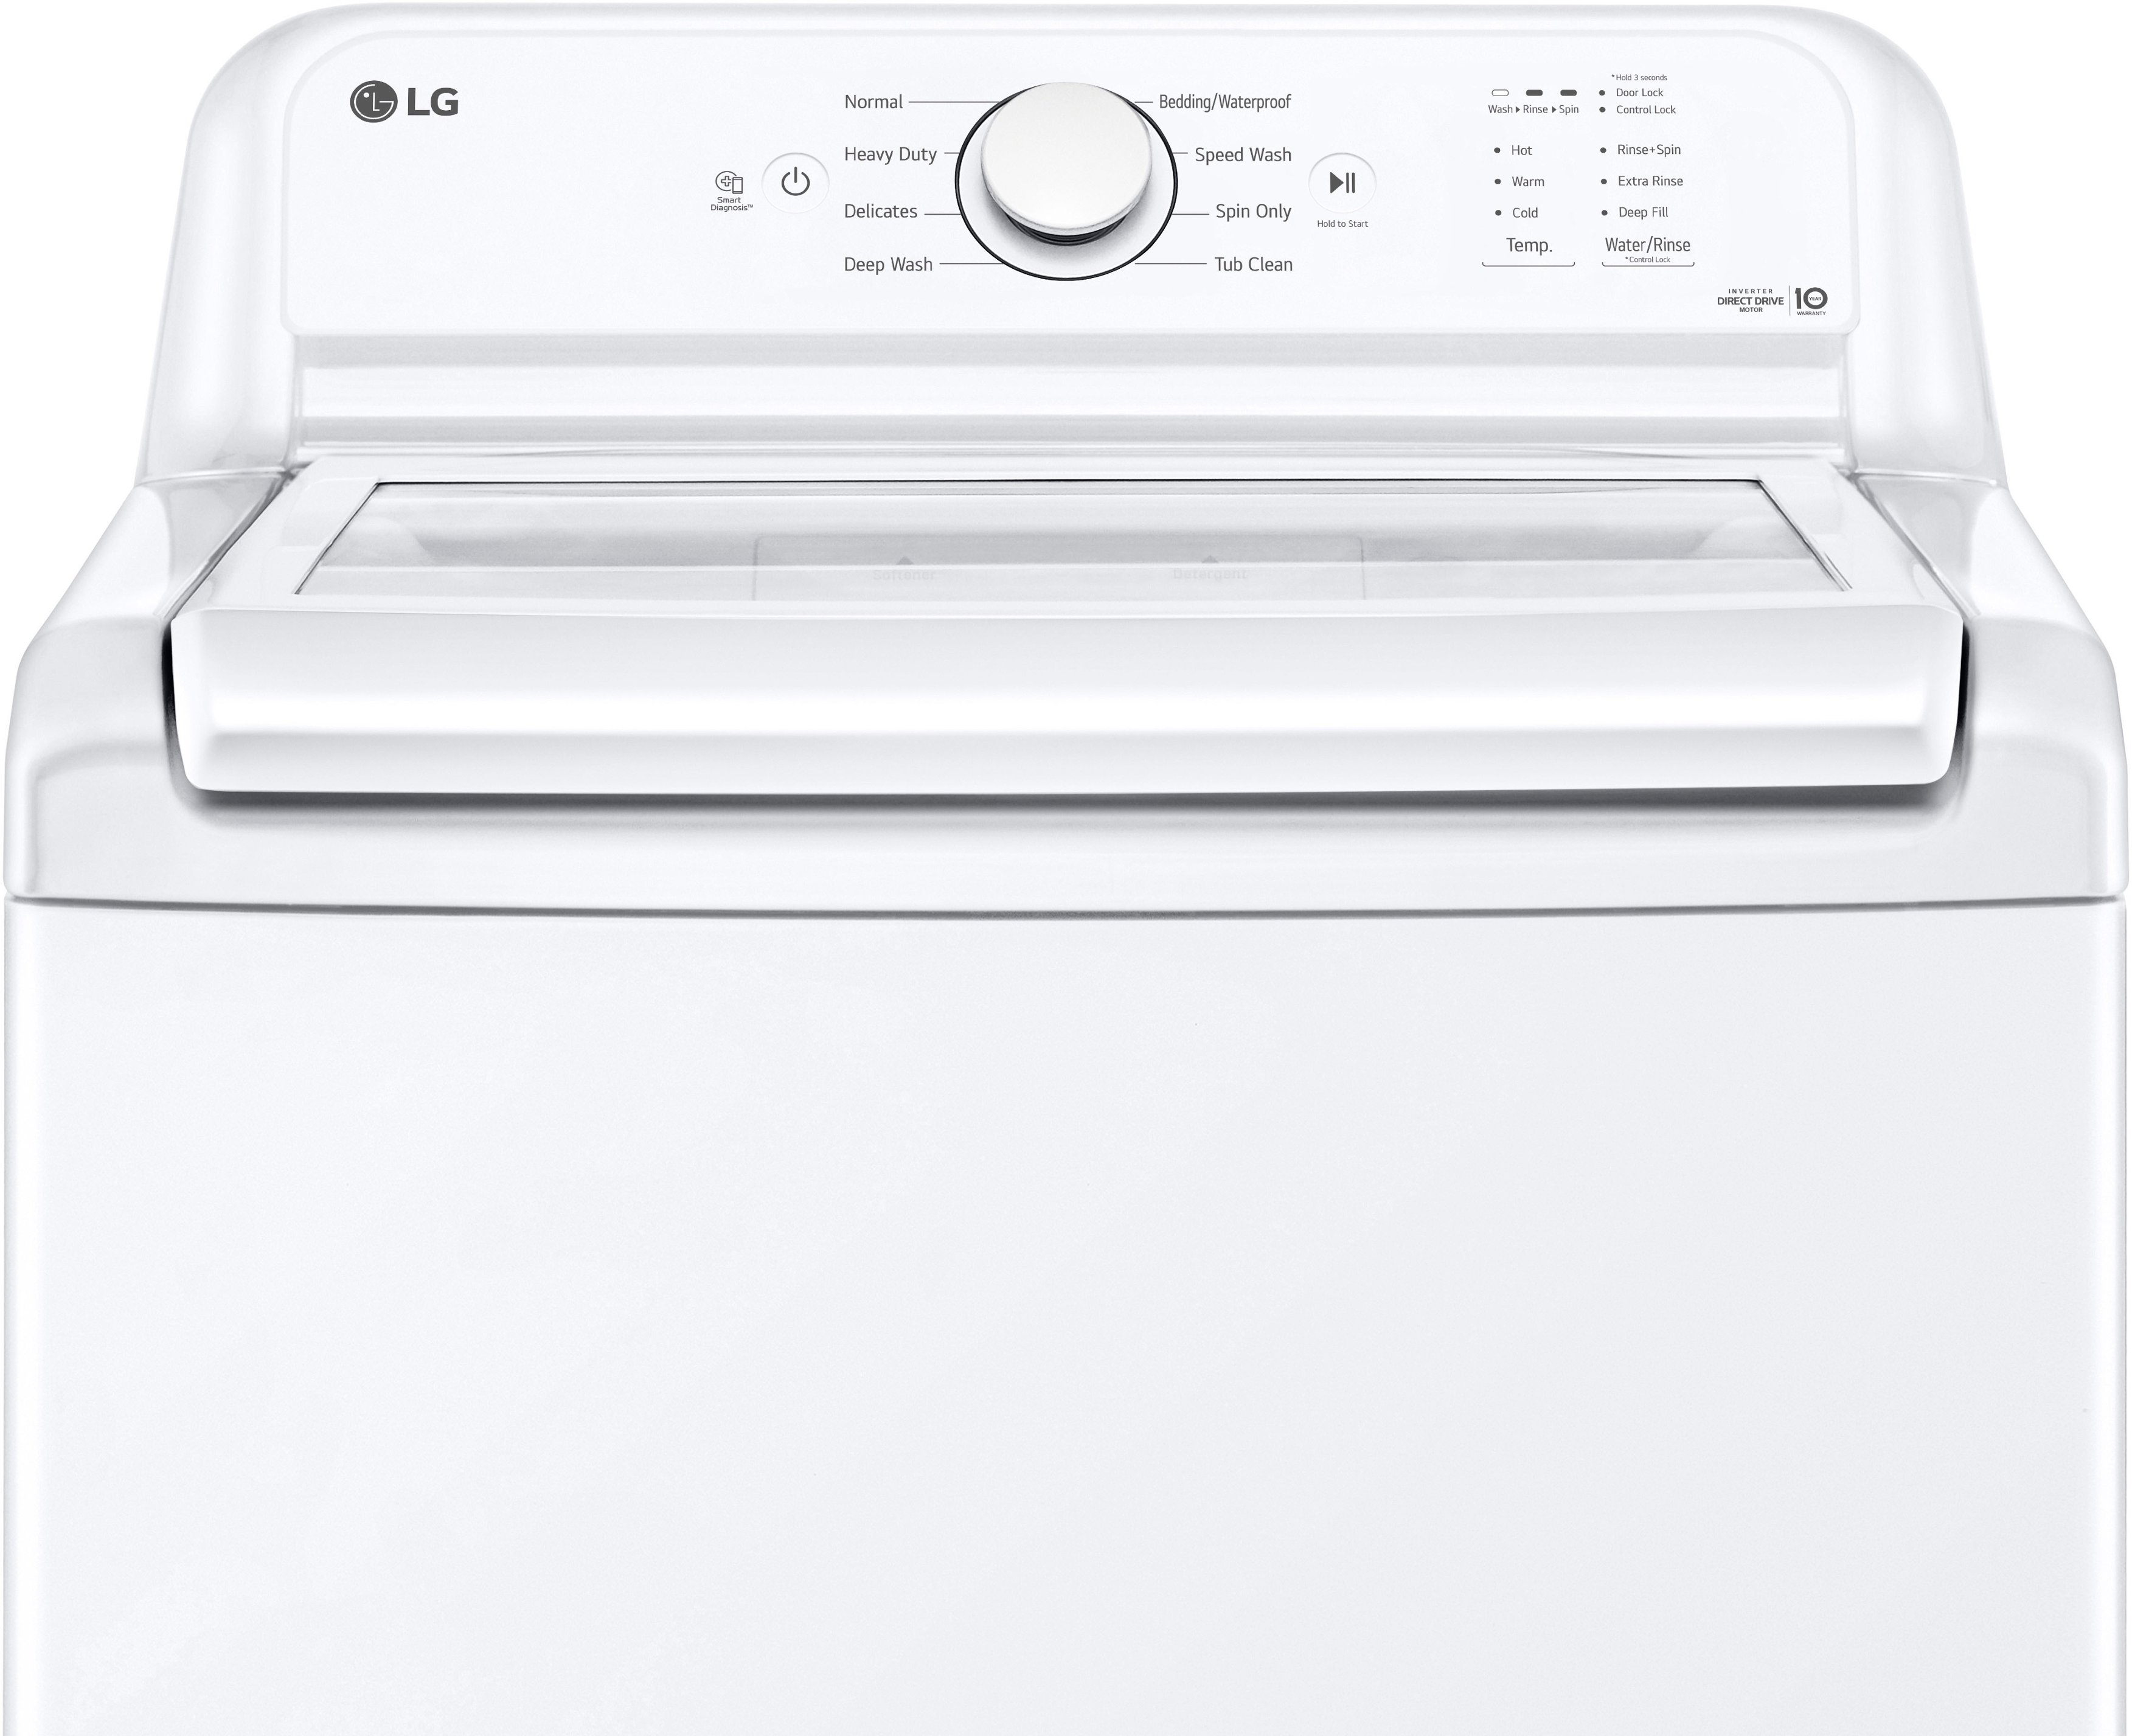 LG 4.1 Lid White Best WT6105CW Top Buy Washer with Cu. Glass Load SlamProof - Ft